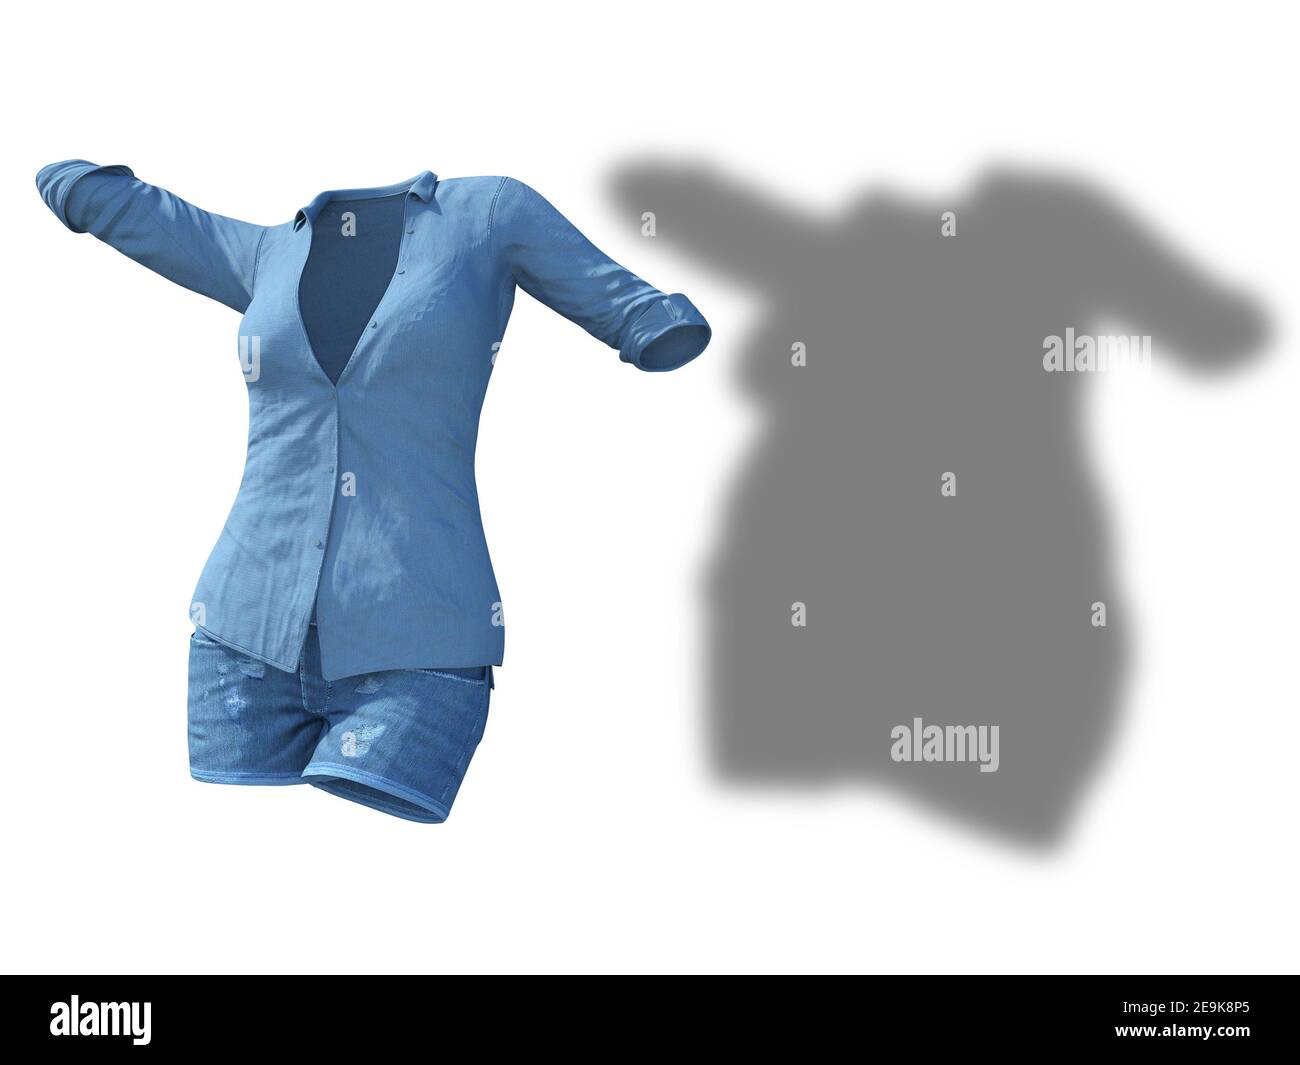 https://c8.alamy.com/comp/2E9K8P5/conceptual-fat-overweight-obese-shadow-female-jeans-shirt-vs-slim-fit-healthy-body-after-weight-loss-or-diet-thin-young-woman-isolated-2E9K8P5.jpg